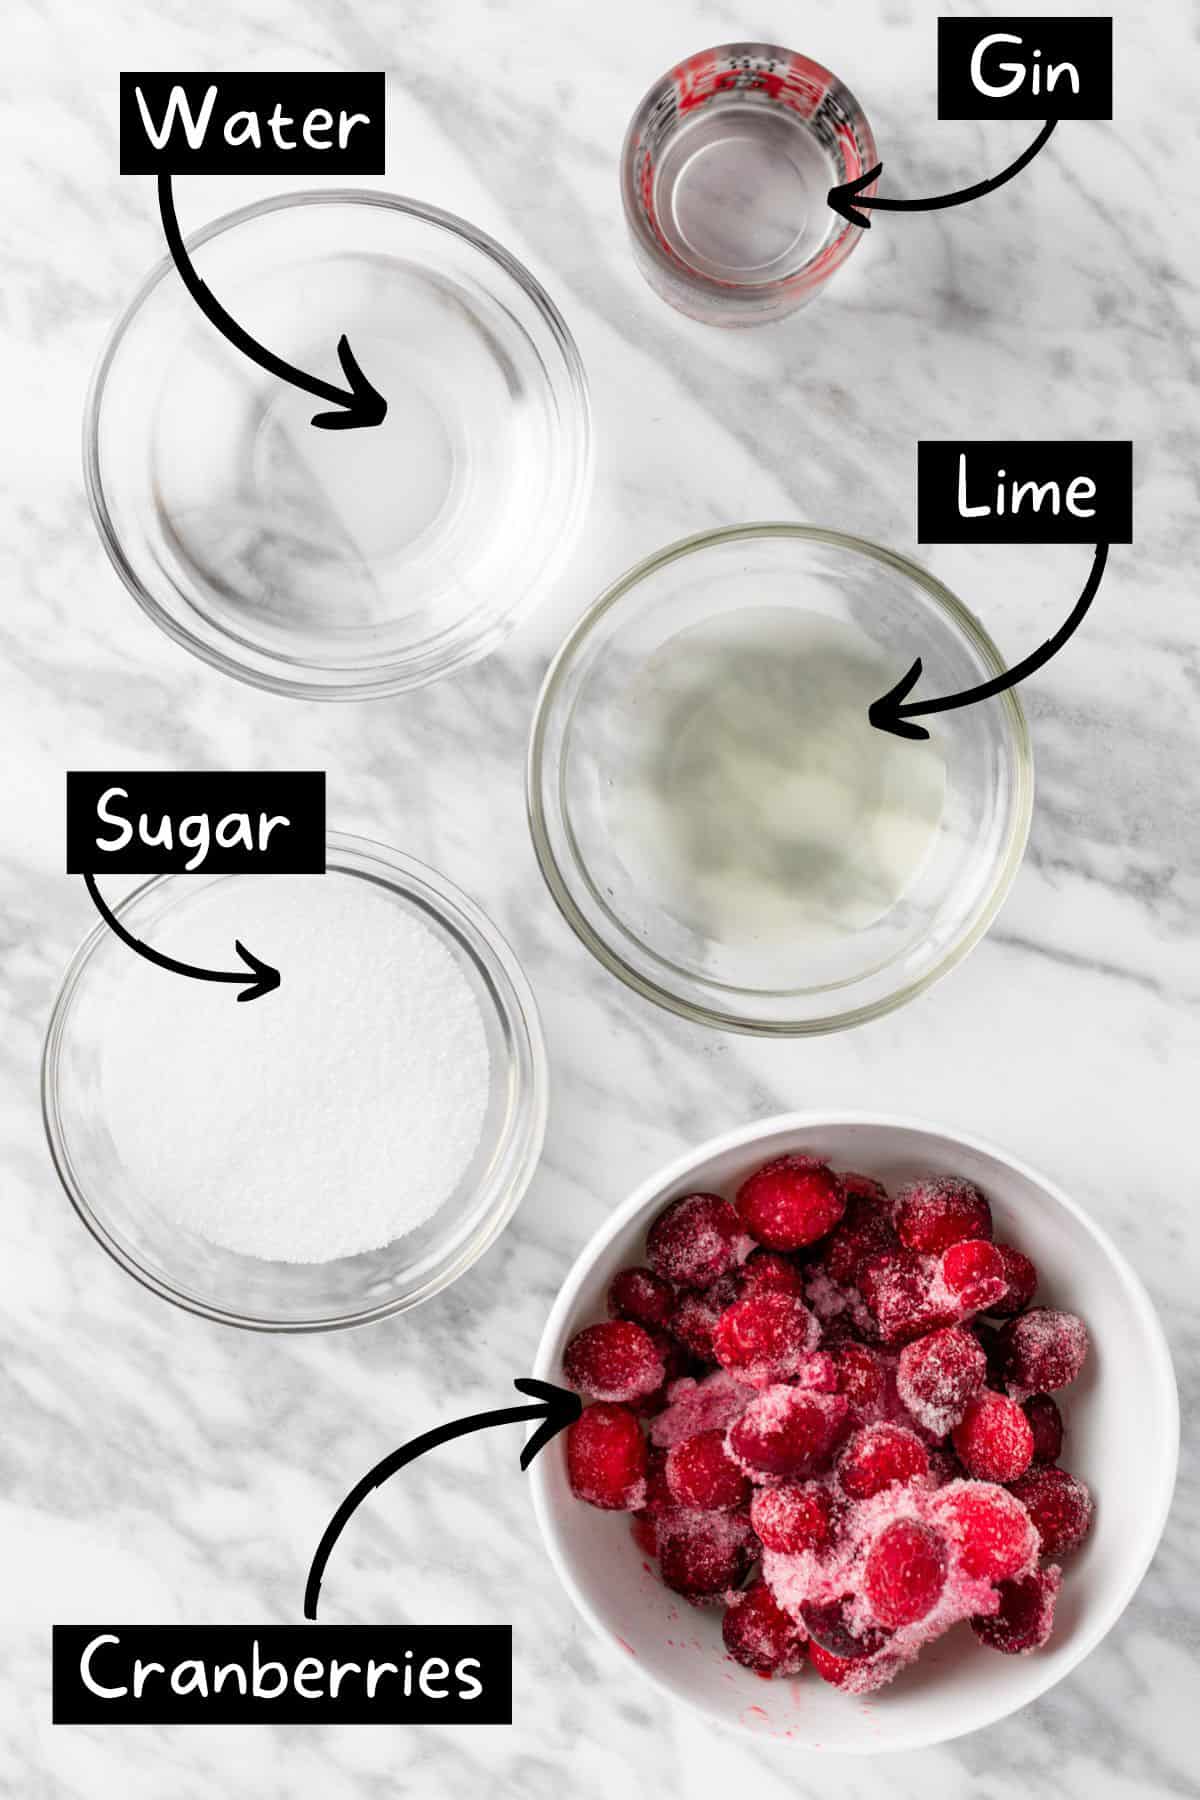 The ingredients needed to make the cranberry gimlet.